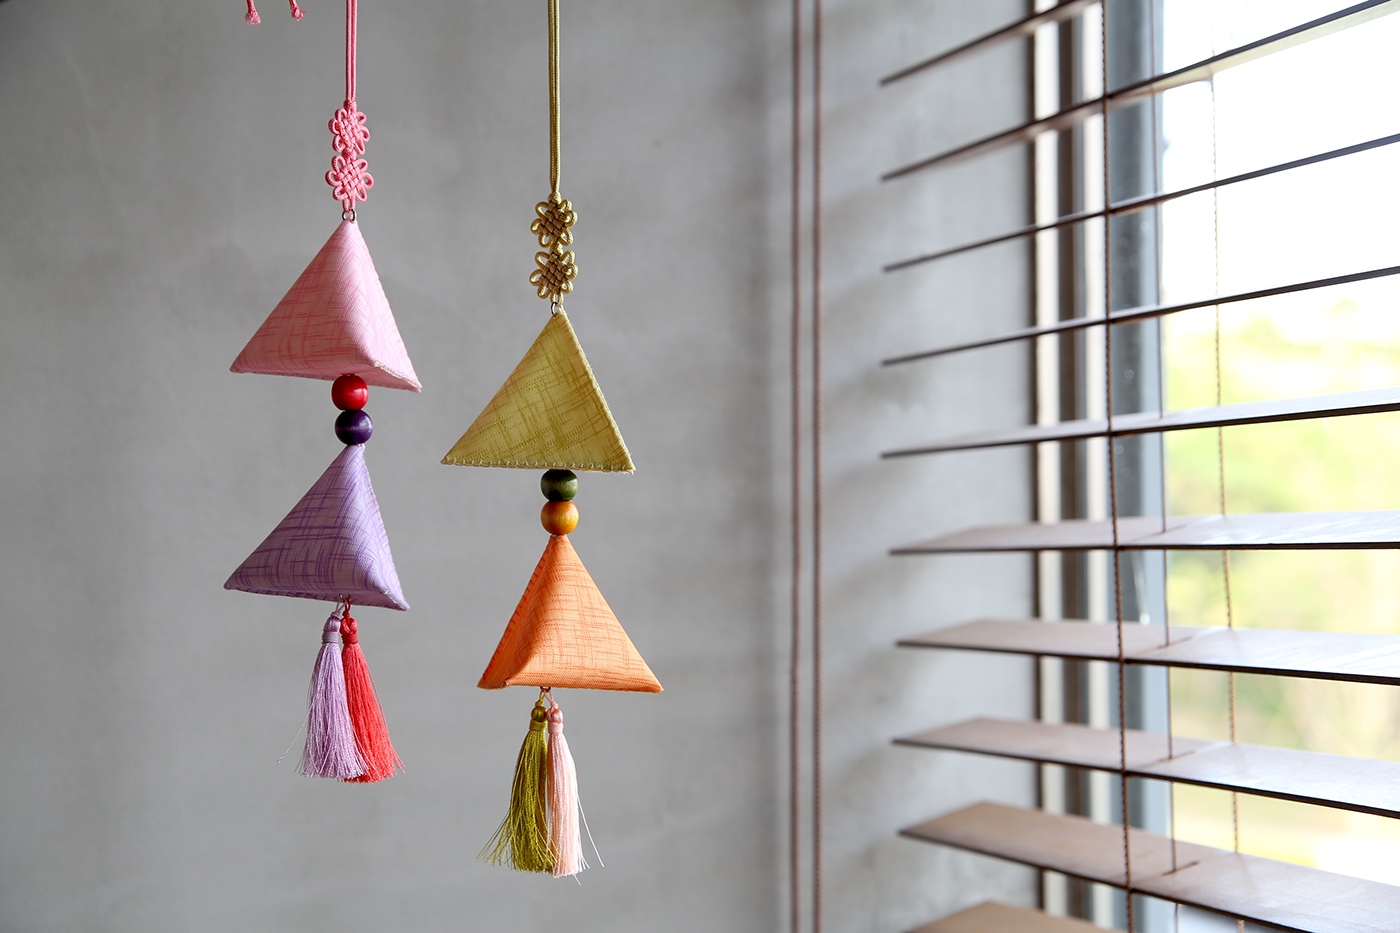 Korea tradition wind chime bell Ramie felt design DIY ready-to-assemble hand made